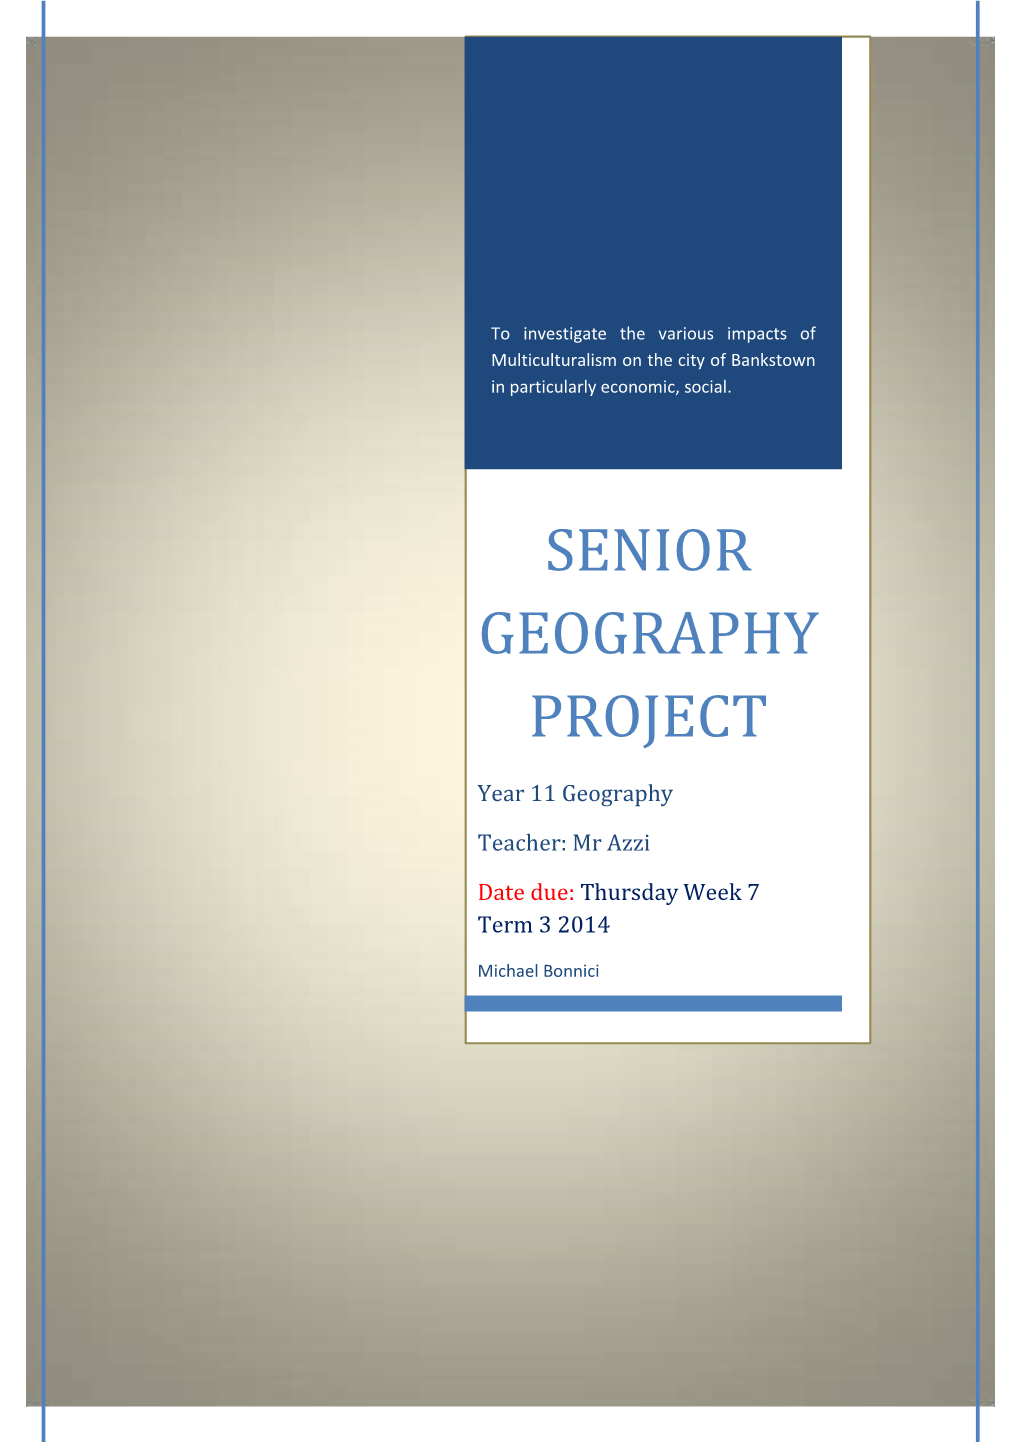 Senior Geography Project